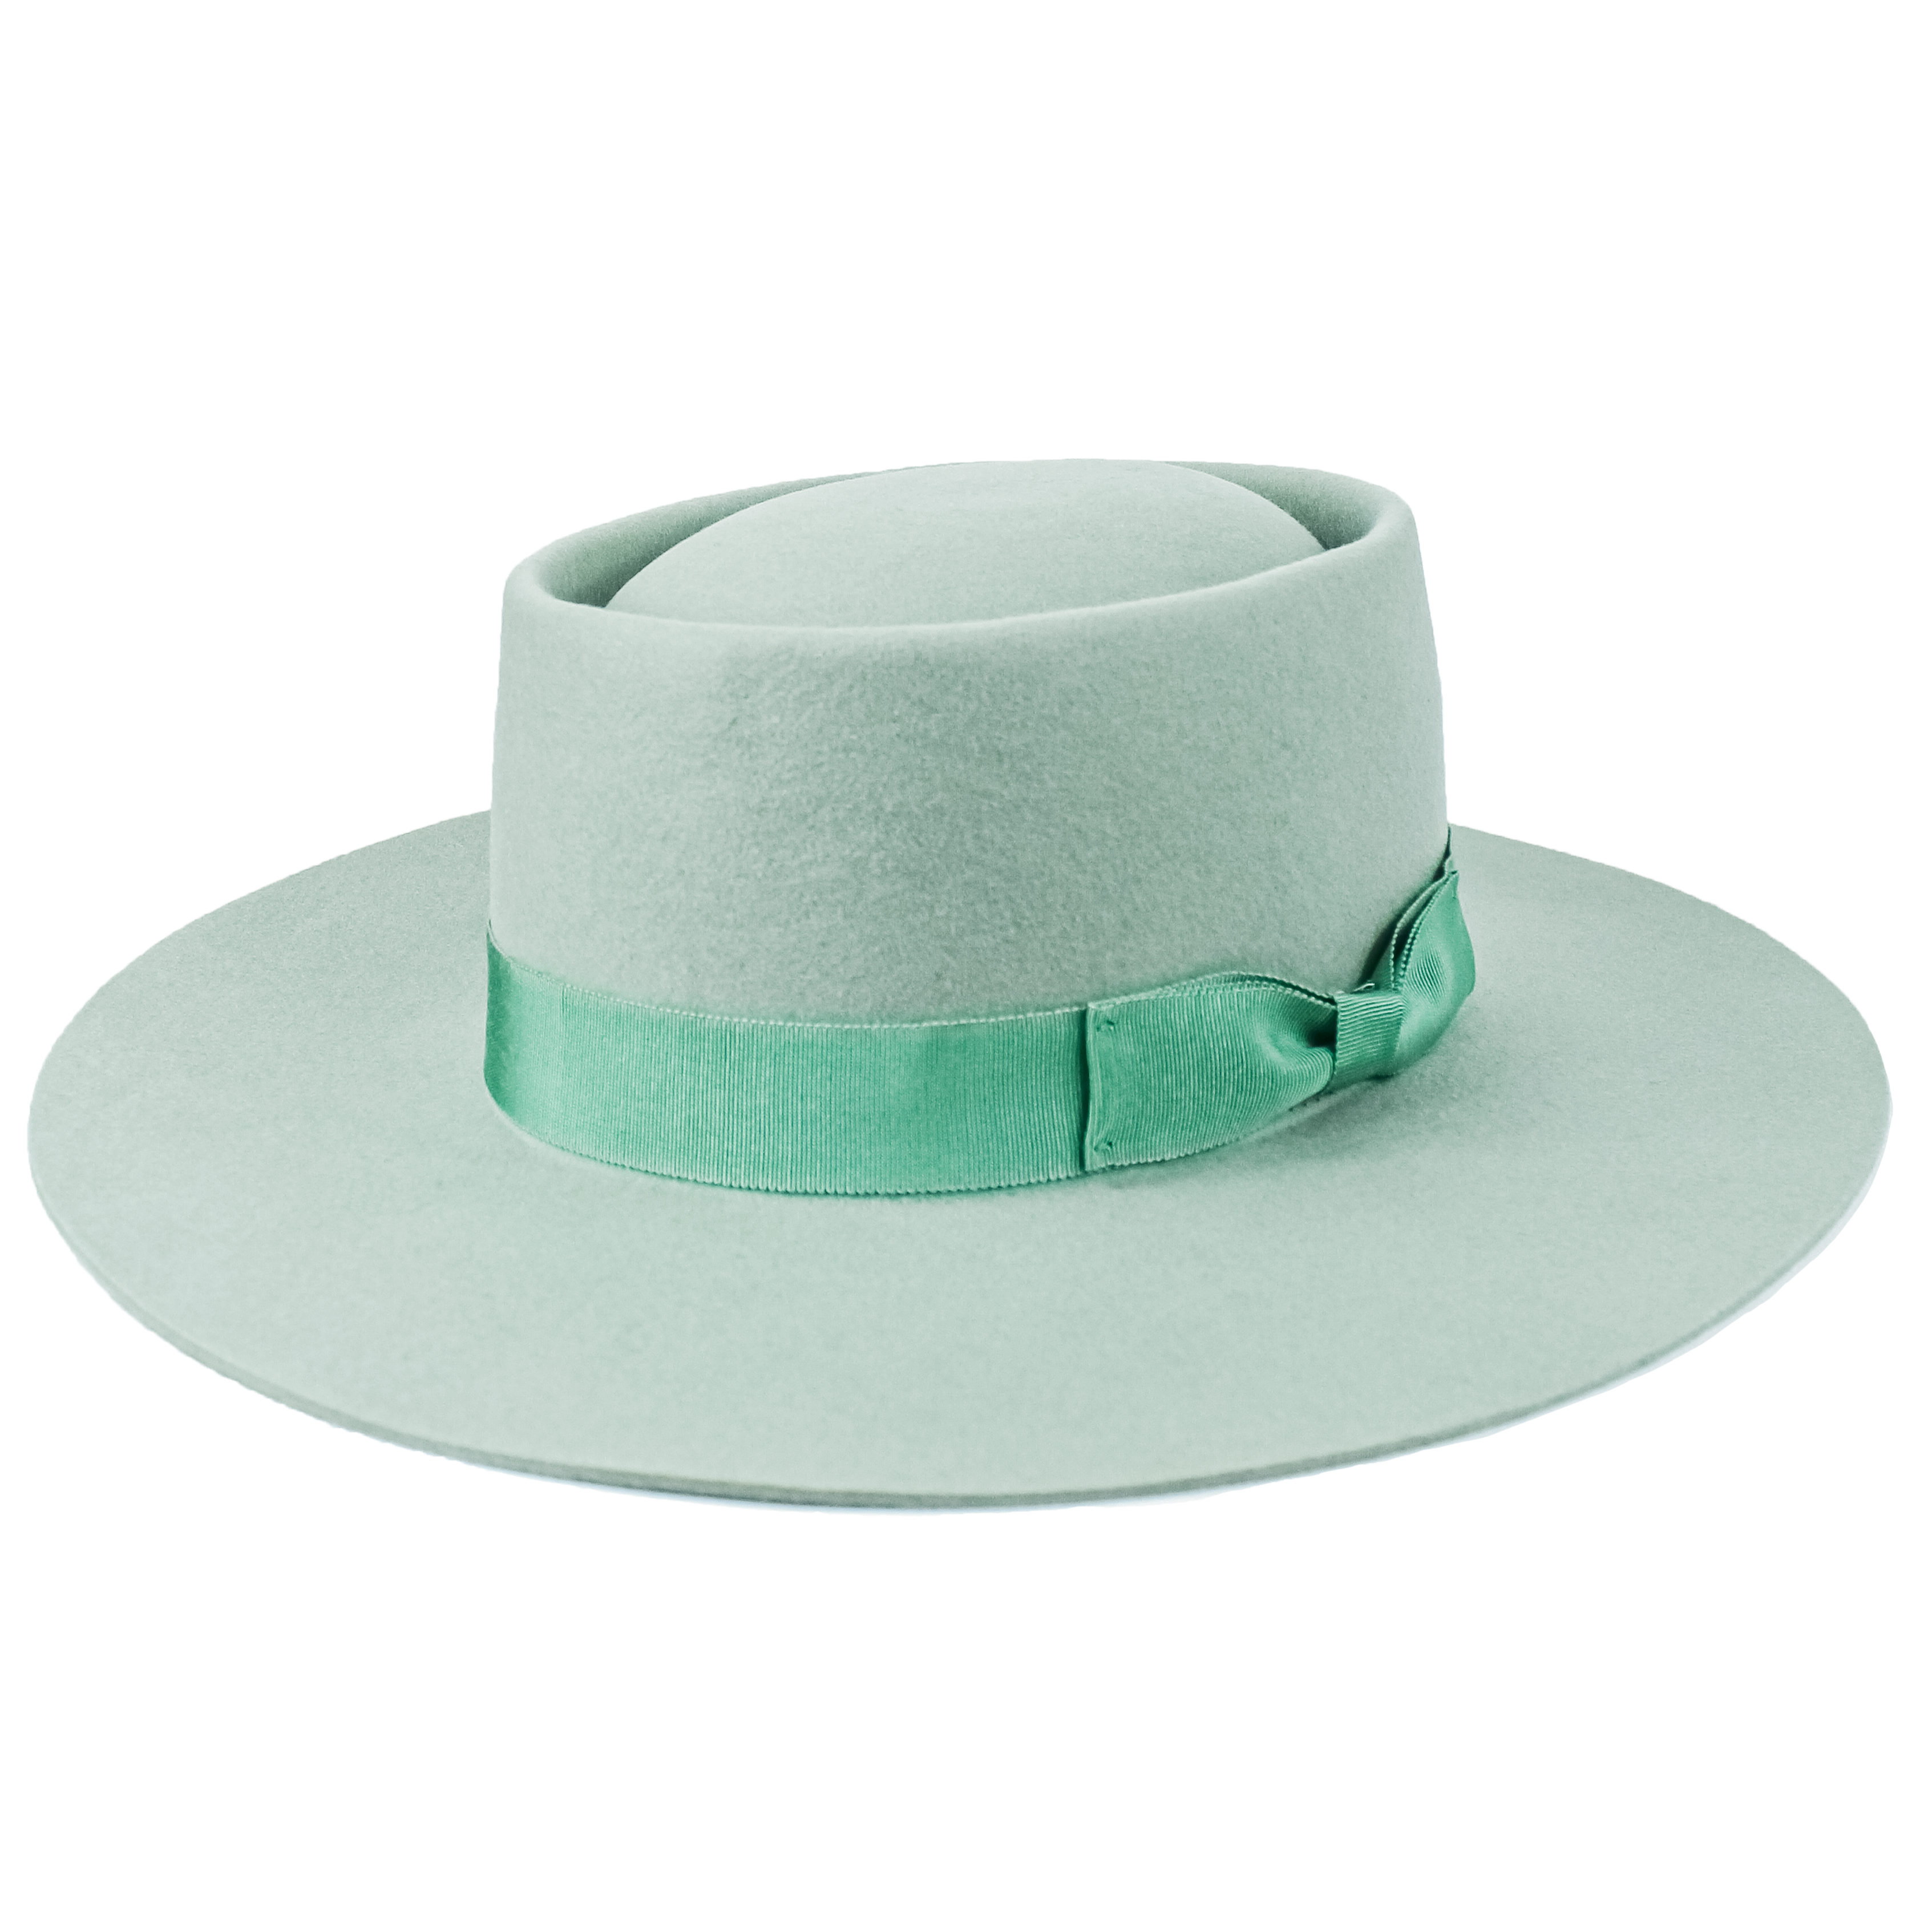 Kayo Boater Hat in Mint Green